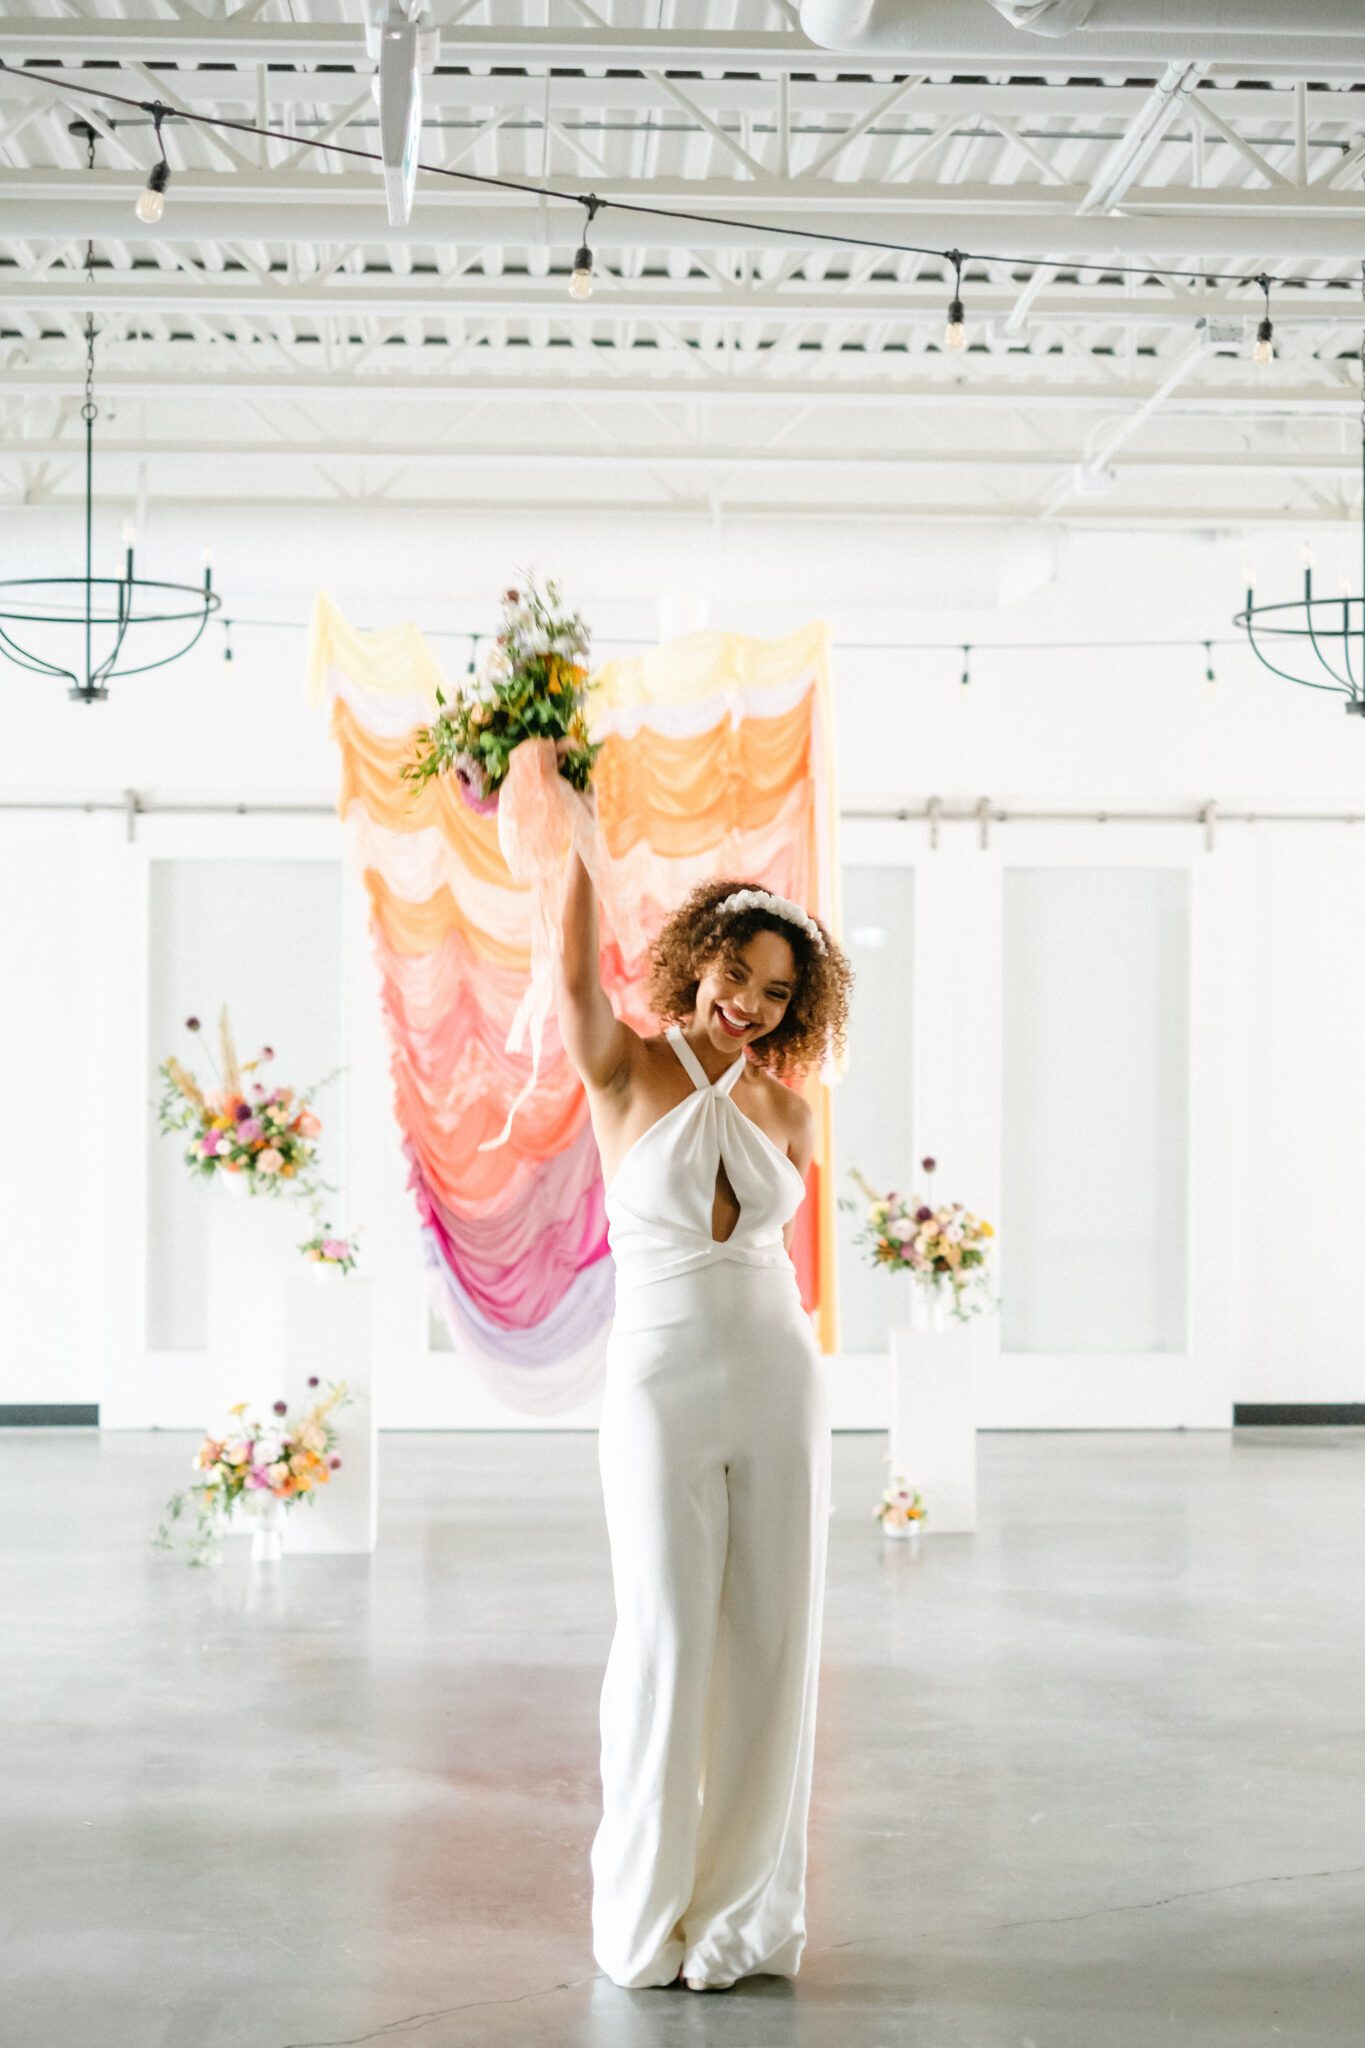 Yellow, tangerine, peach, pink, and purple ruched fabric ceremony backdrop, featuring whimsical florals by Meadow & Vine at The Brownstone in Calgary, Alberta. Bride wearing retro-inspired bridal jumpsuit and custom floral headpiece.